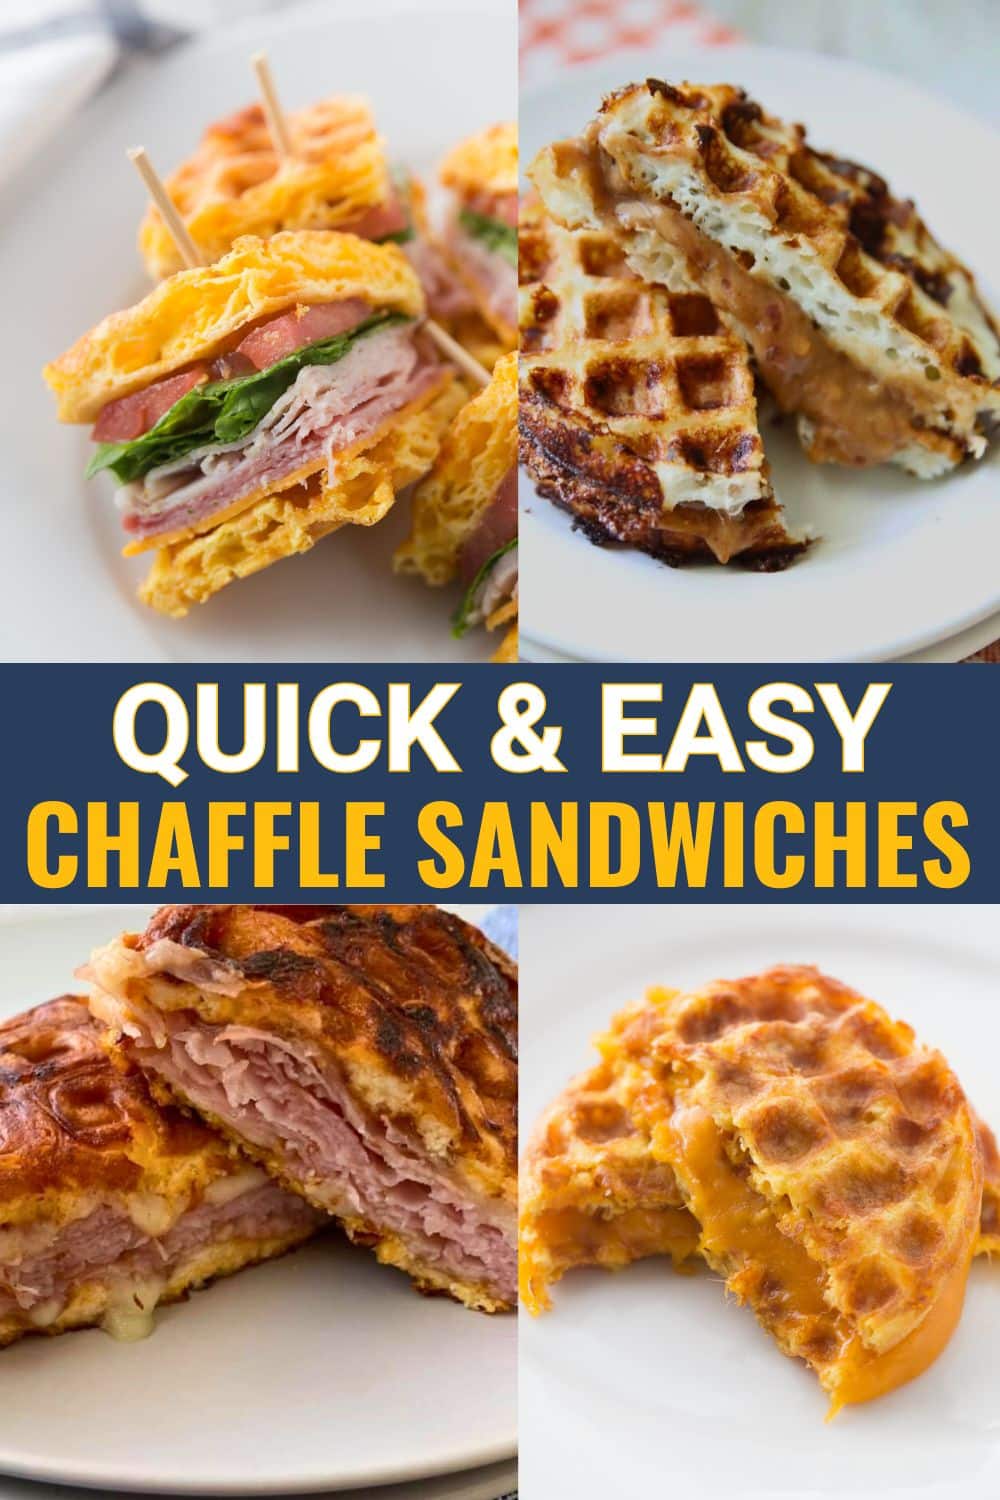 Four custom chaffle breakfast sandwiches: Top left shows a chaffle club sandwich cut in quarters, with a close-up of one slice filled with chicken, bacon, and vegetables. The top right displays two peanut butter and jelly chaffle sandwiches sliced in half and neatly stacked. In the center is a "Quick and Easy Chaffle Sandwiches" card. On the bottom left is a cross-section of a ham and cheese chaffle revealing the meats and fillings inside. Lastly, bottom right exhibits a diagonally cut grilled cheese chaffle sandwich.